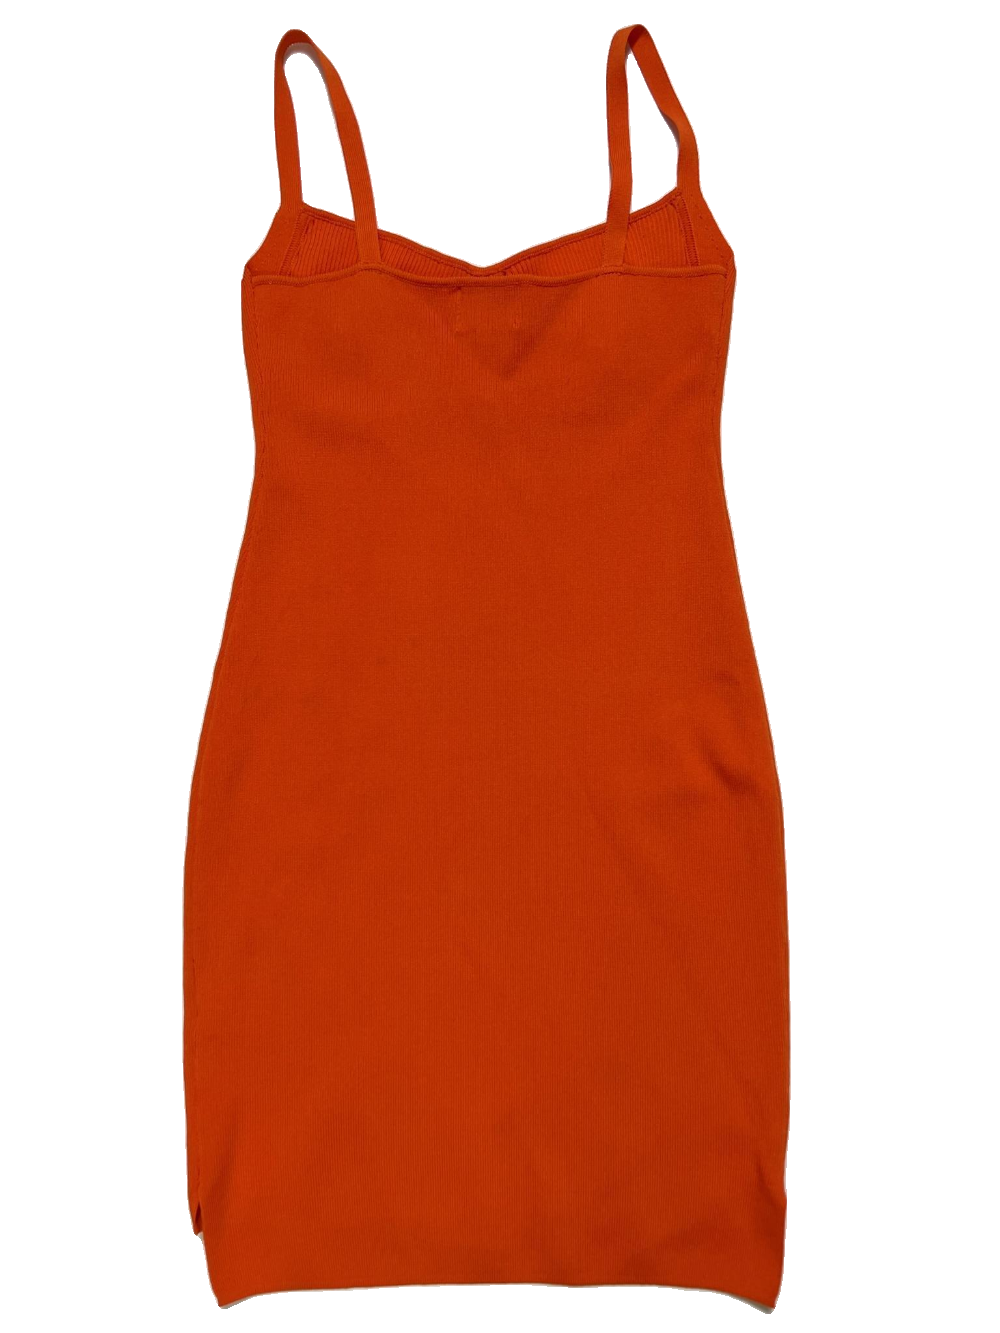 Sndys./ Molly King - Orange Knit Dress - NEW WITH TAGS